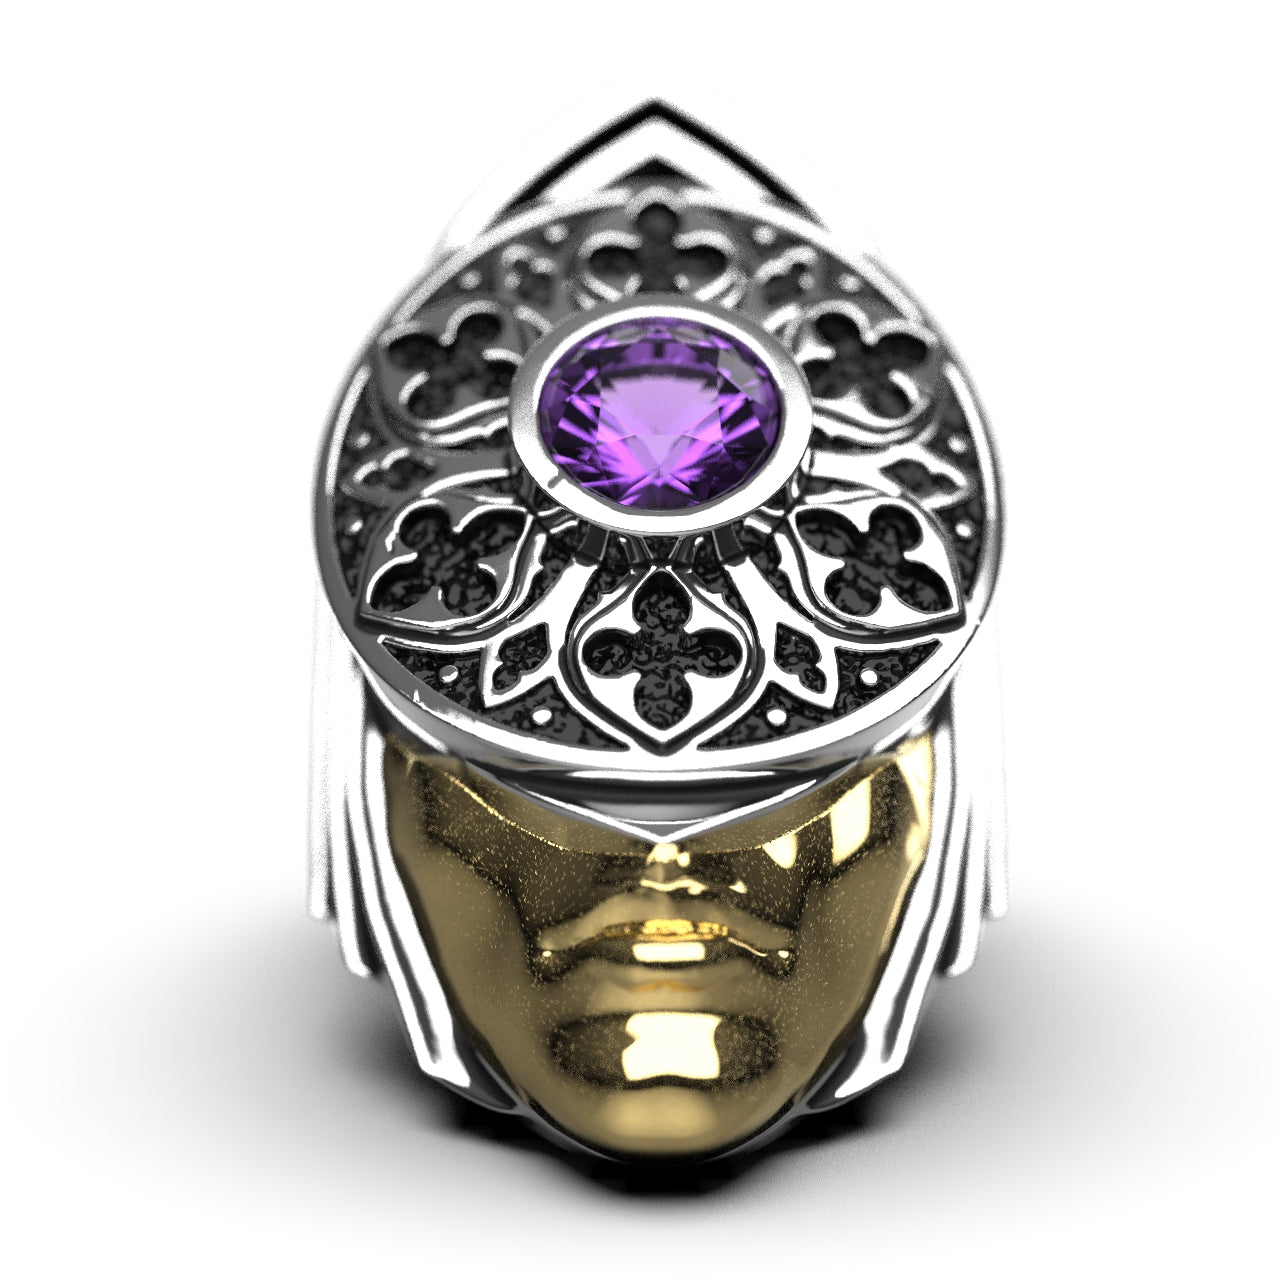 The Ring of the High Priestess